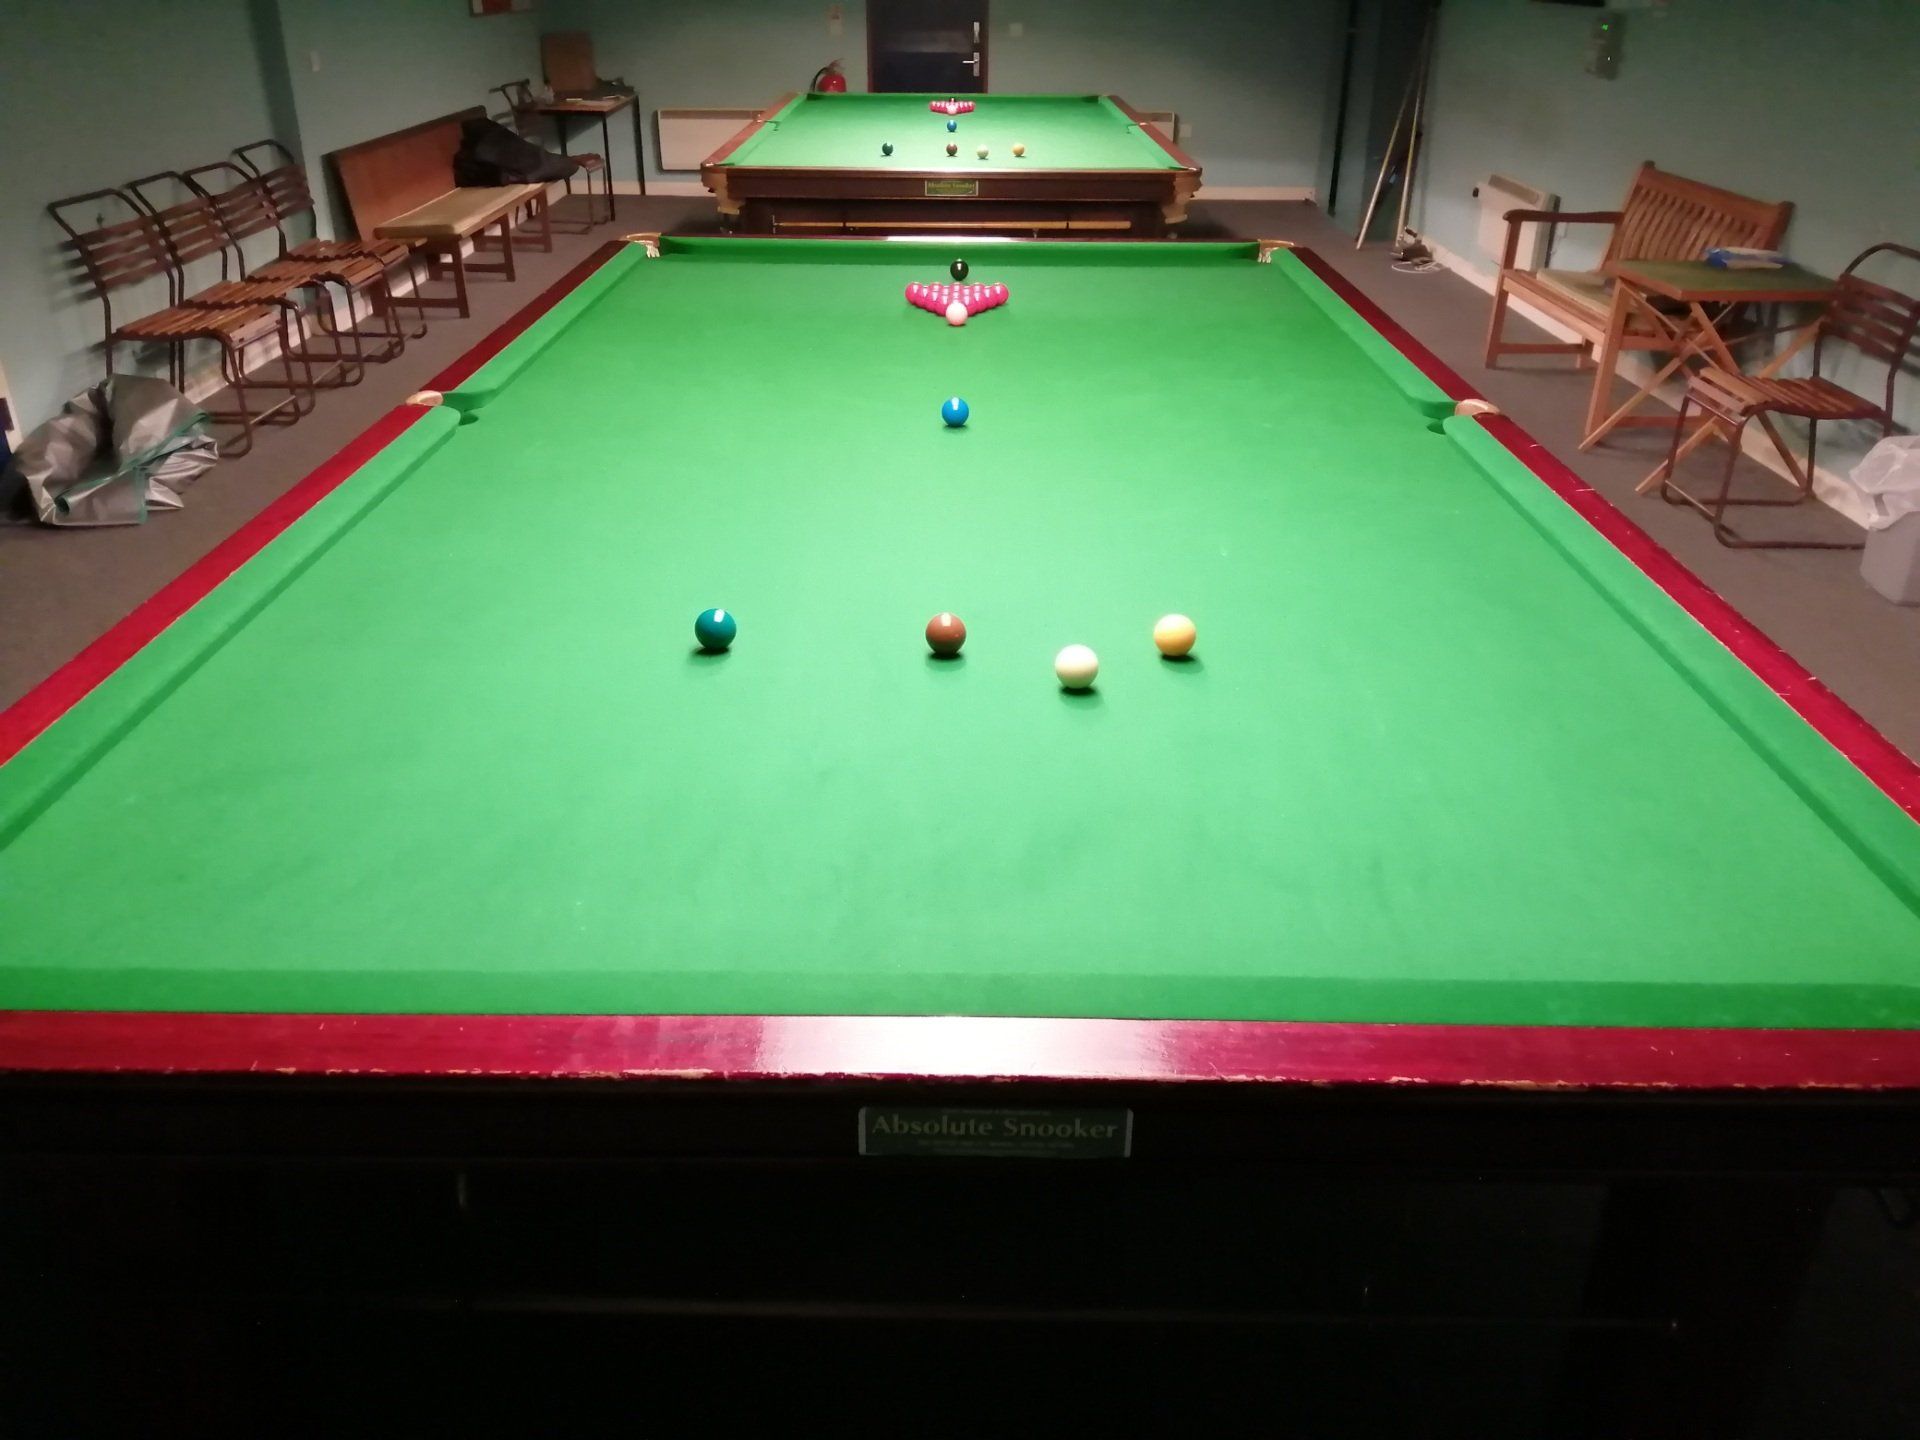 South Zeal Snooker Club